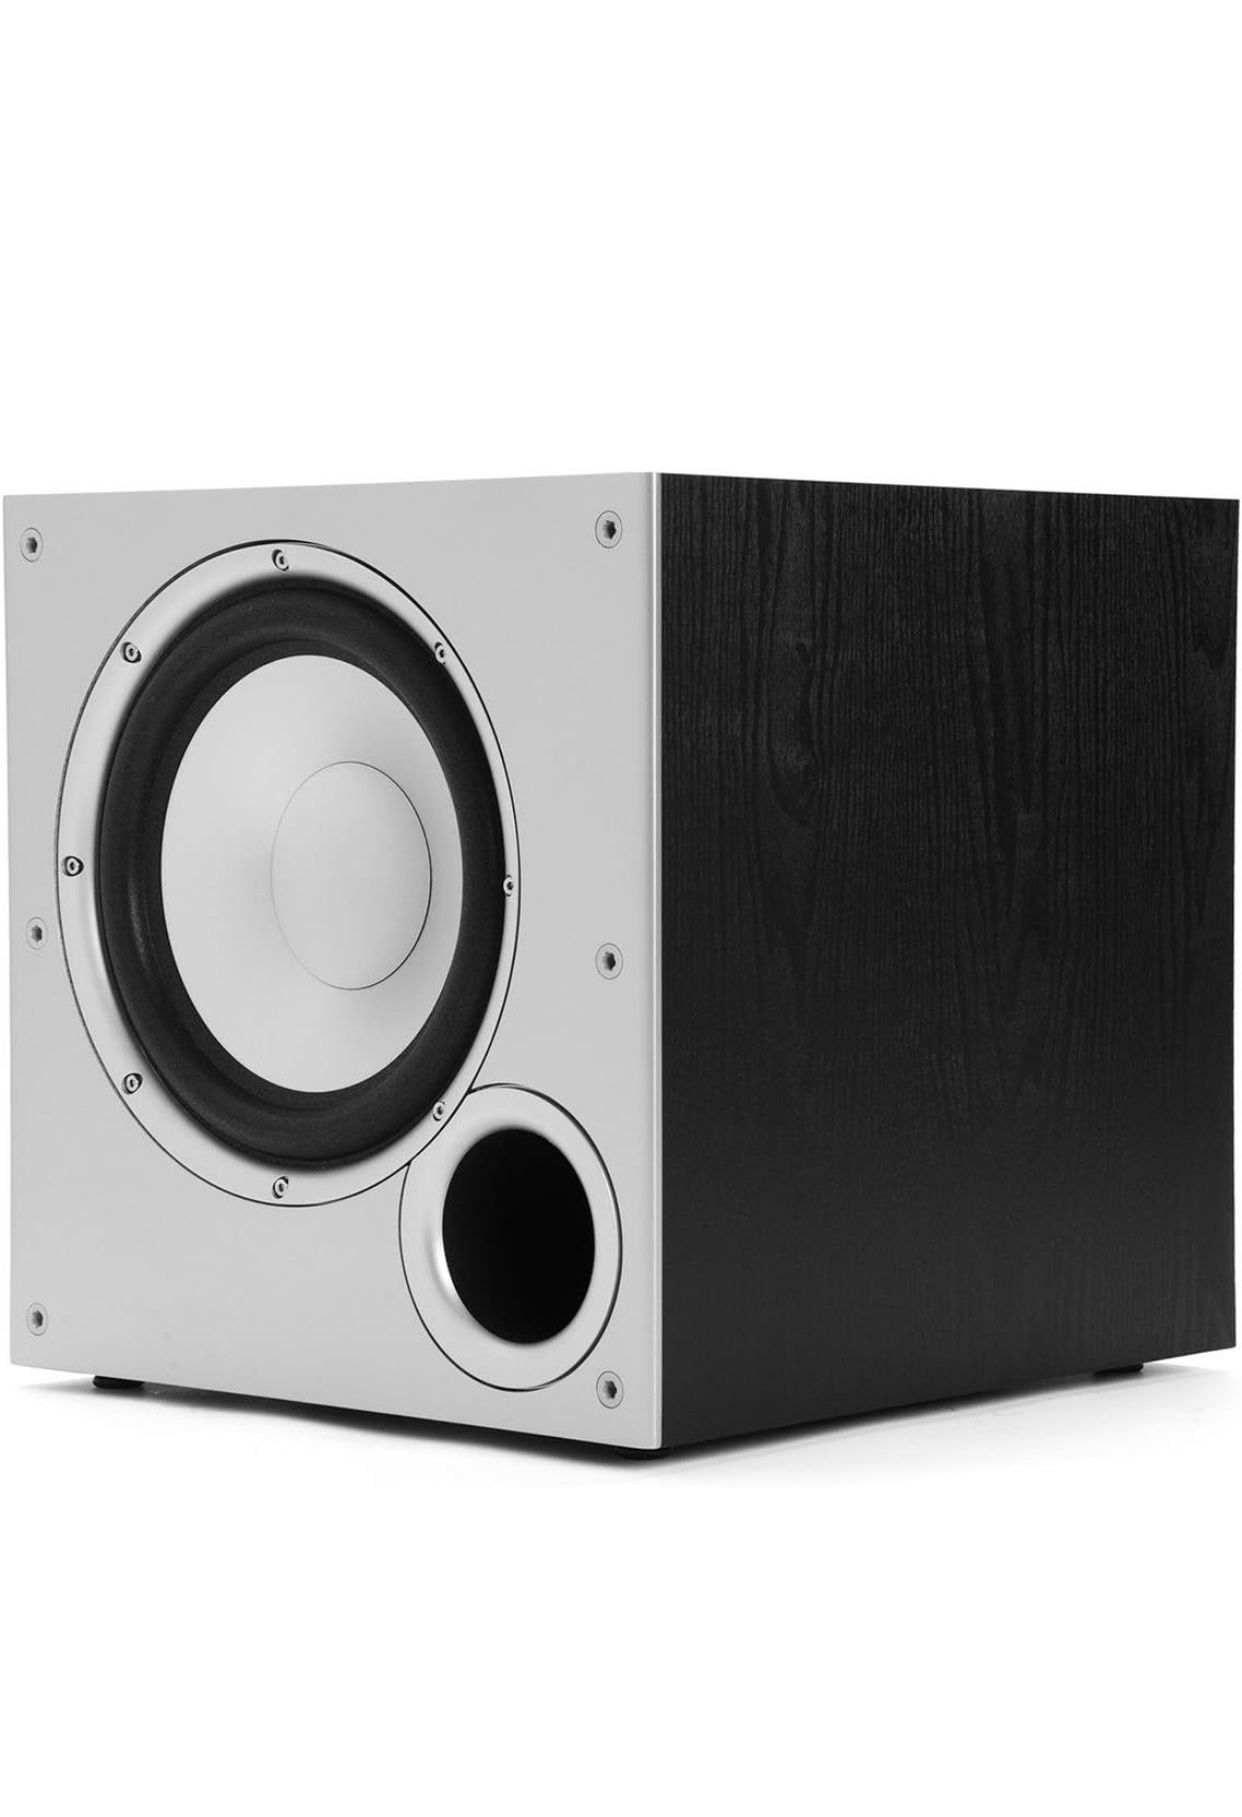 Polk Audio PSW10 10" Powered Subwoofer – Power Port Technology, Up to 100 Watts